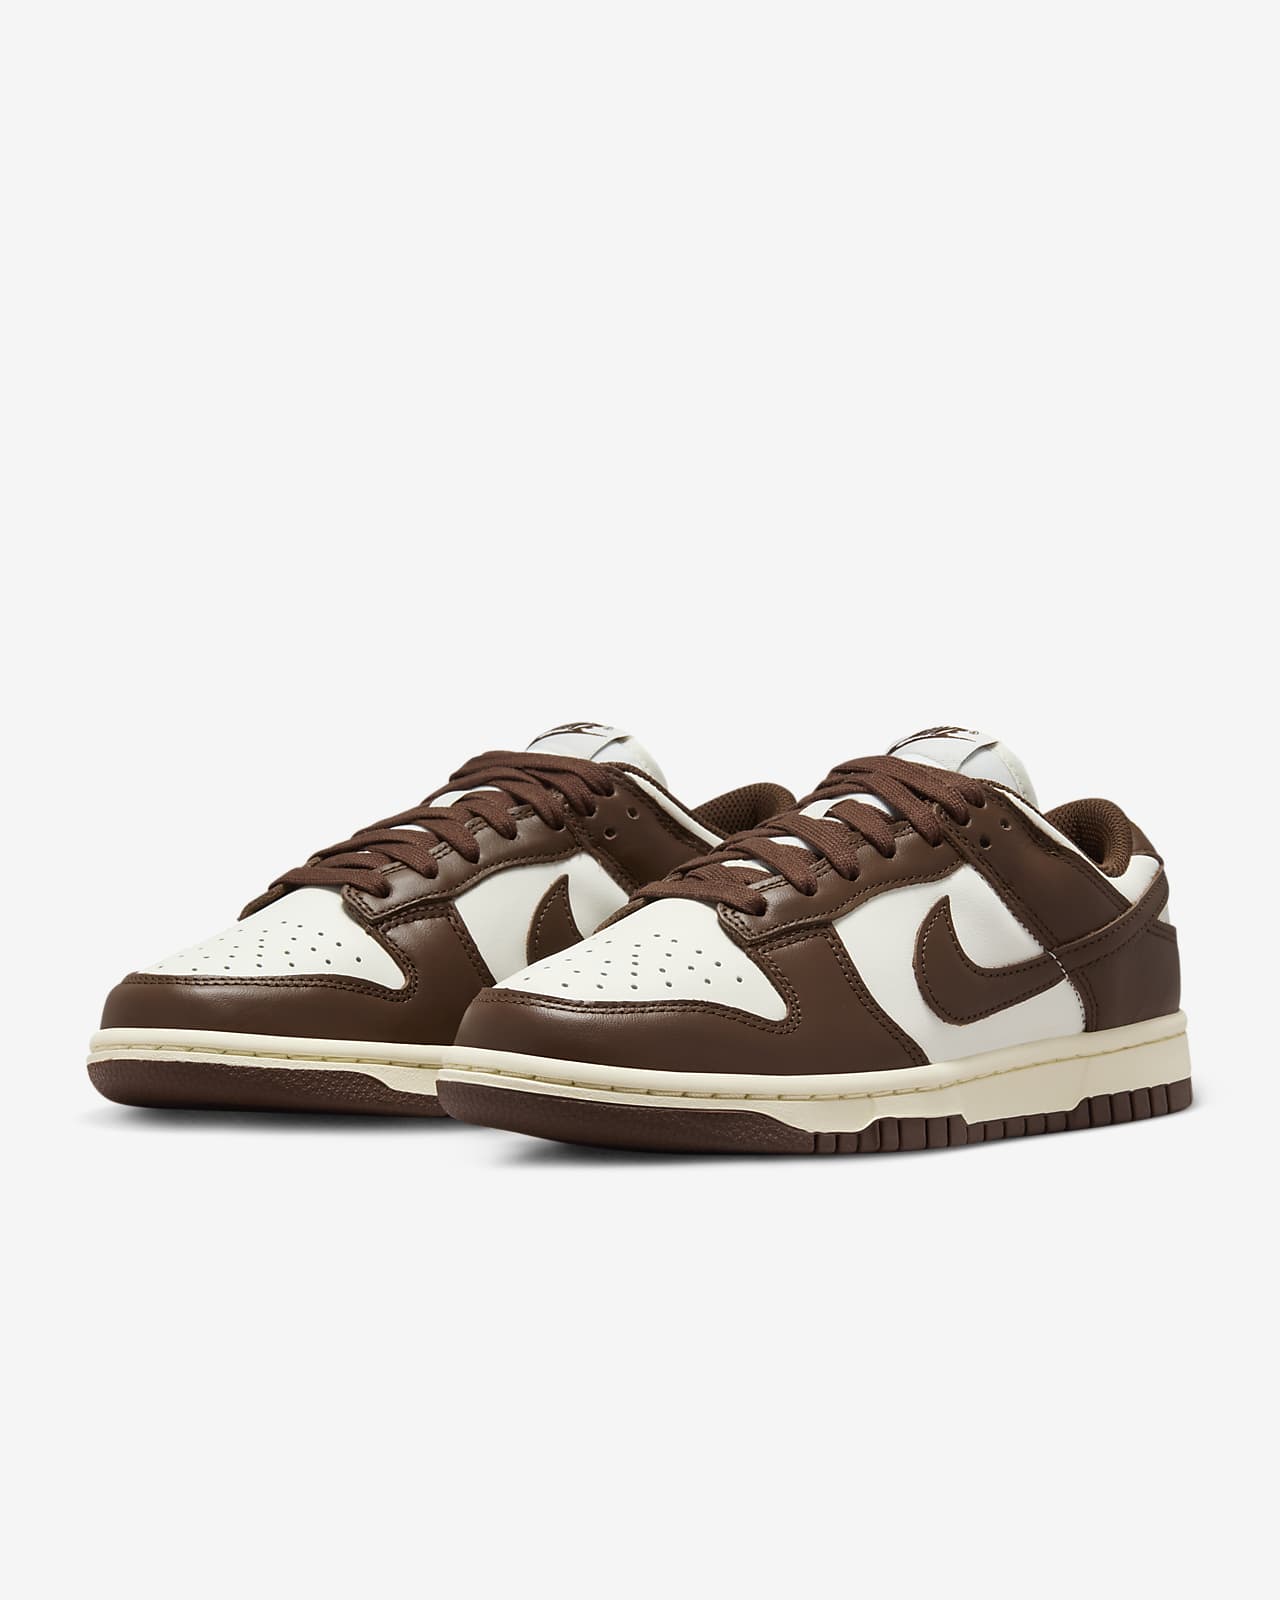 Chaussure Nike Dunk Low pour Femme